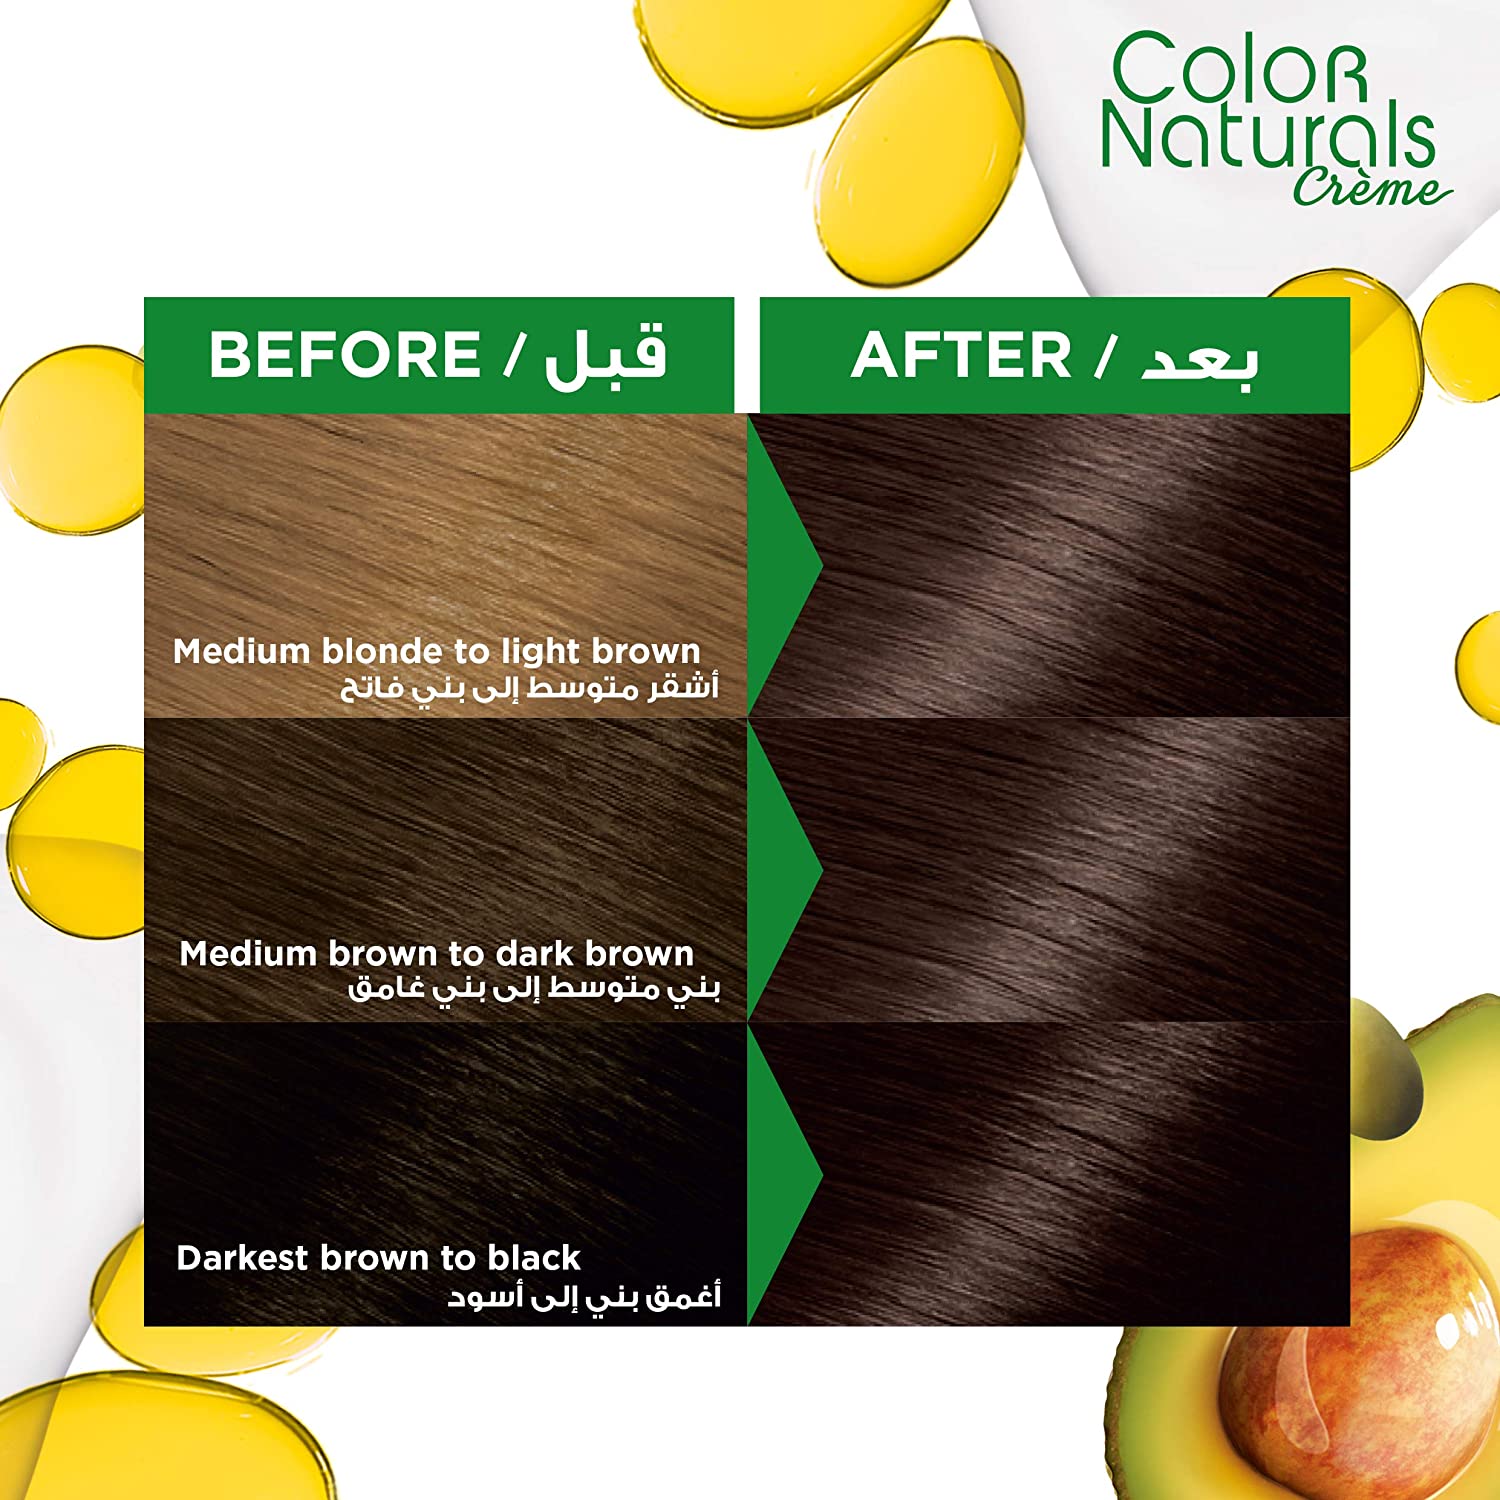 Hair Color Naturals 5.1 Light Ashy Brown